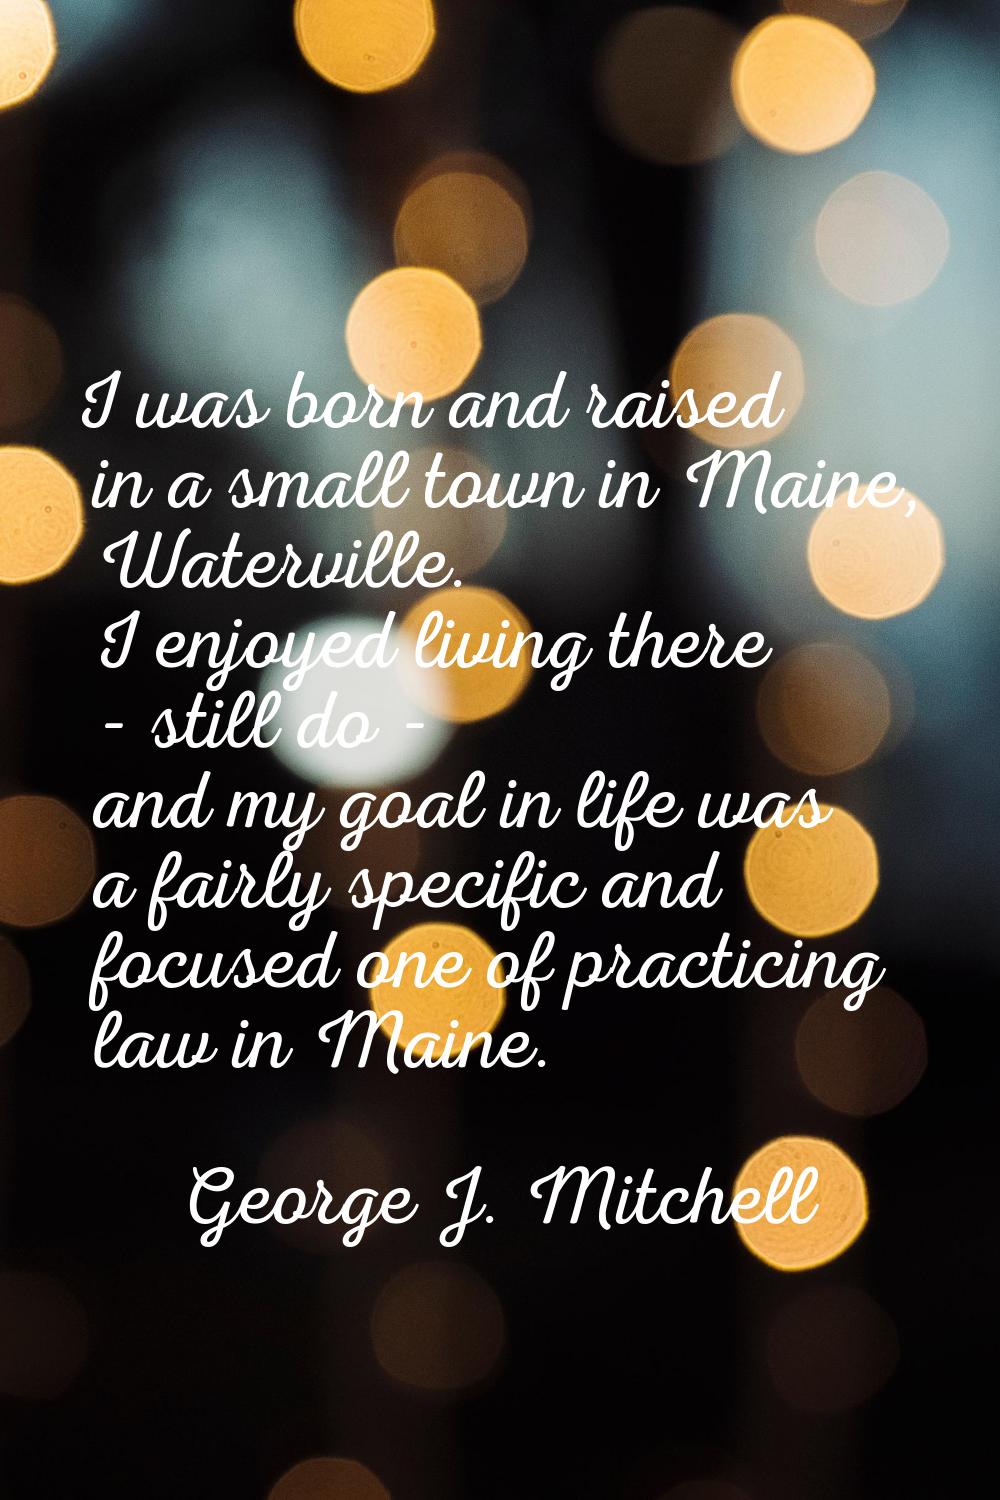 I was born and raised in a small town in Maine, Waterville. I enjoyed living there - still do - and